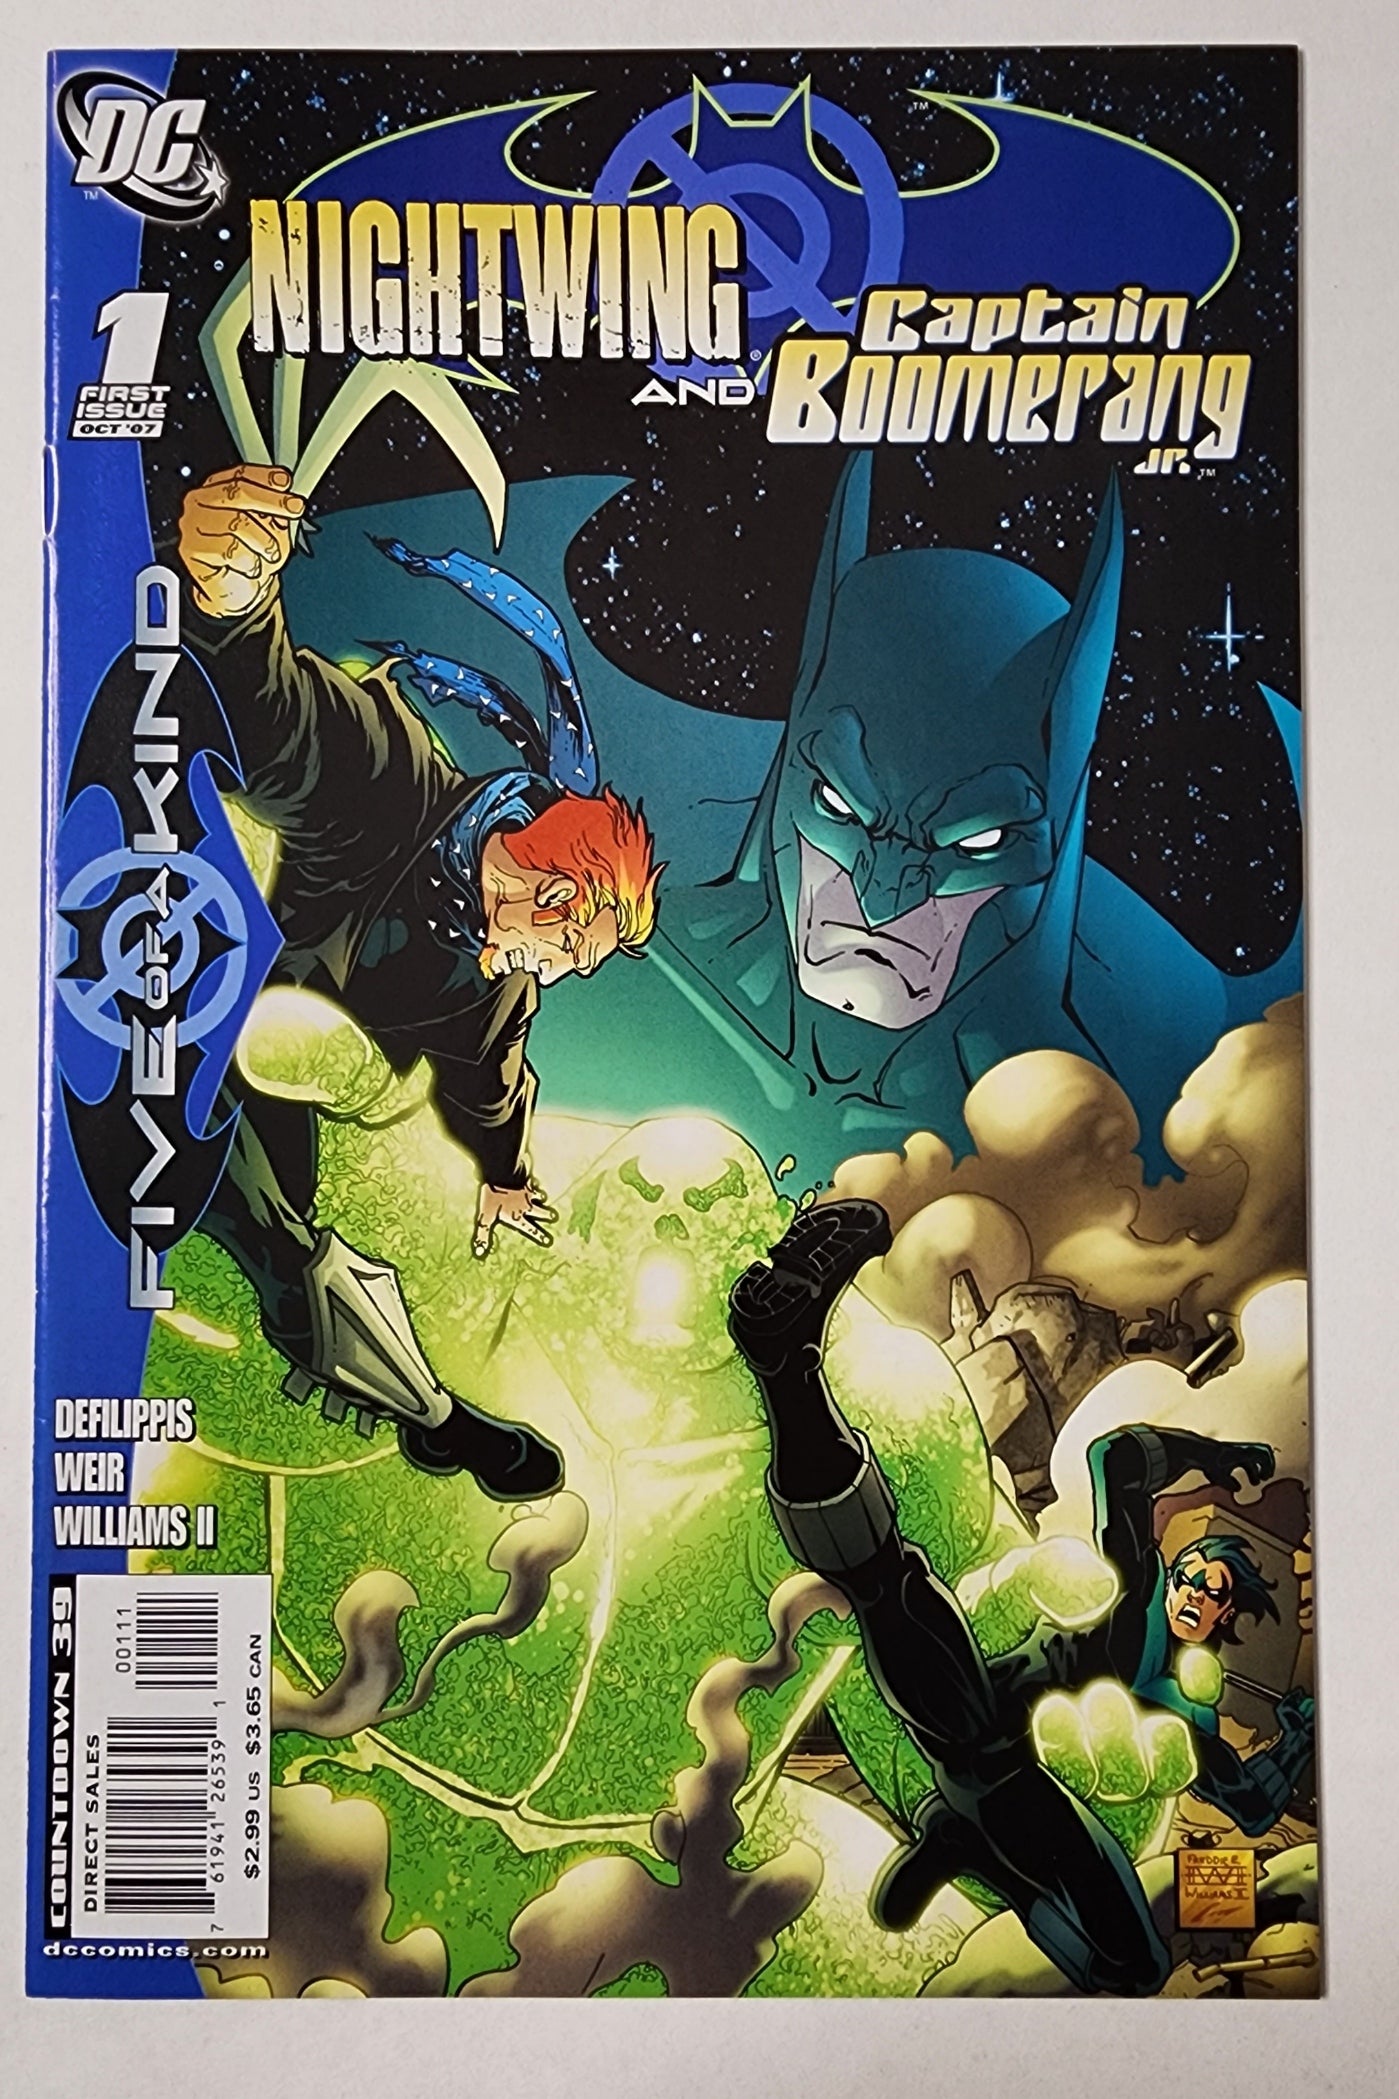 Outsiders: Five of a Kind- Nightwing & Captain Boomerang Jr. #1 (VF)